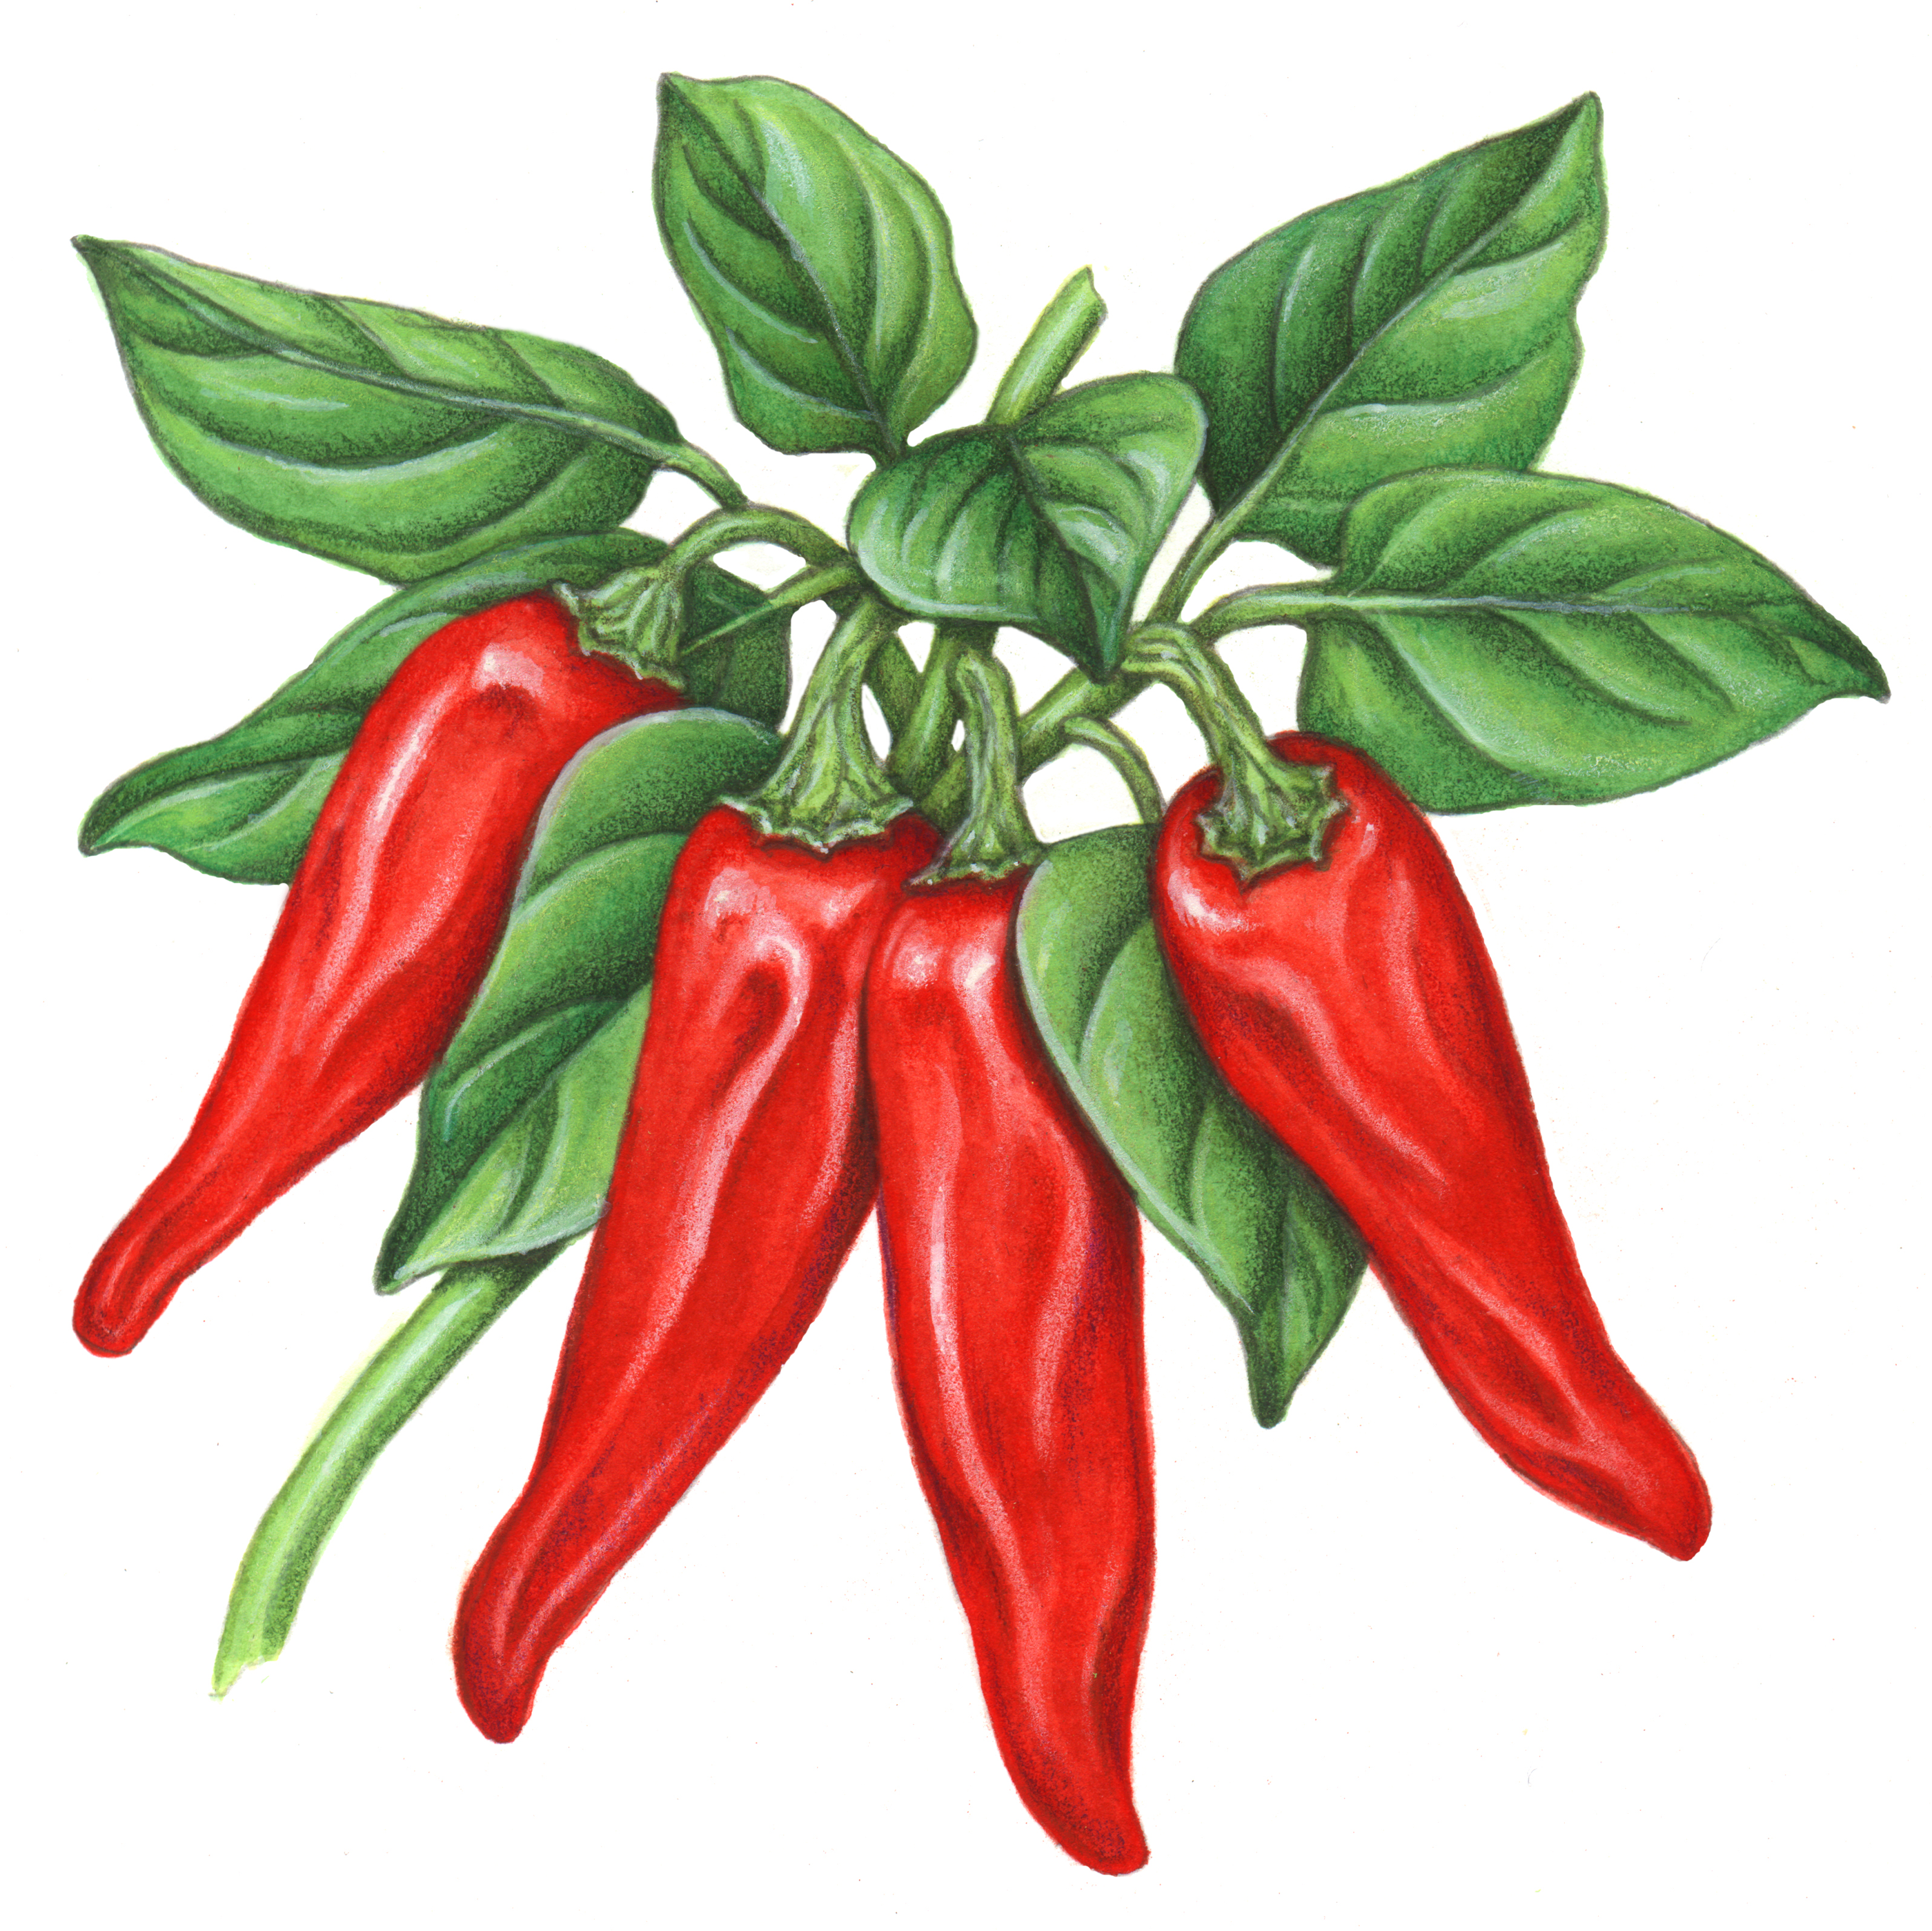 Red paprika peppers on a branch with leaves